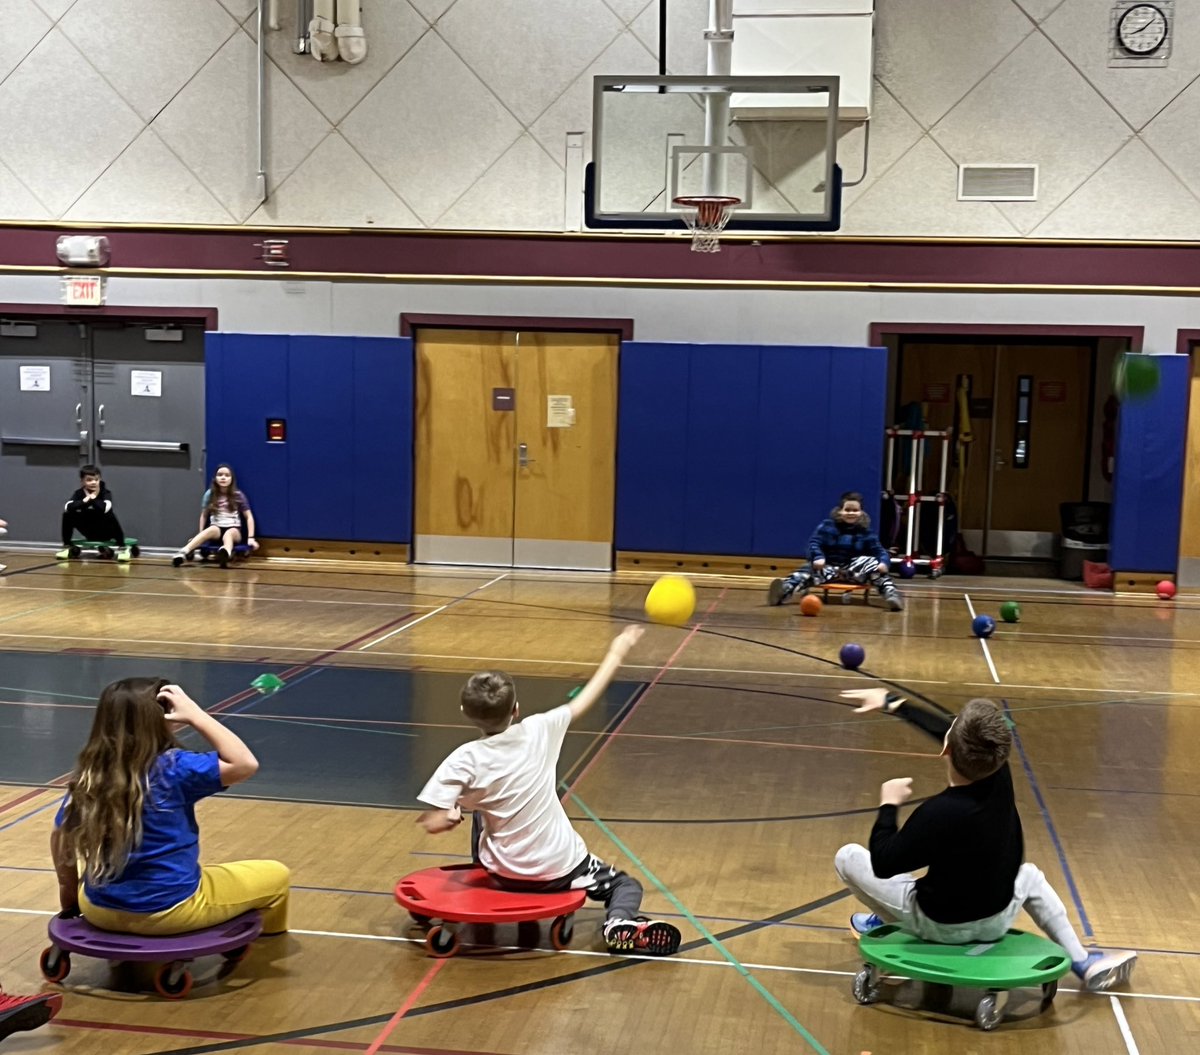 The combination of dodgeball with scooters is genius…pure genius. Middle school gym is rocking with energy this morning!